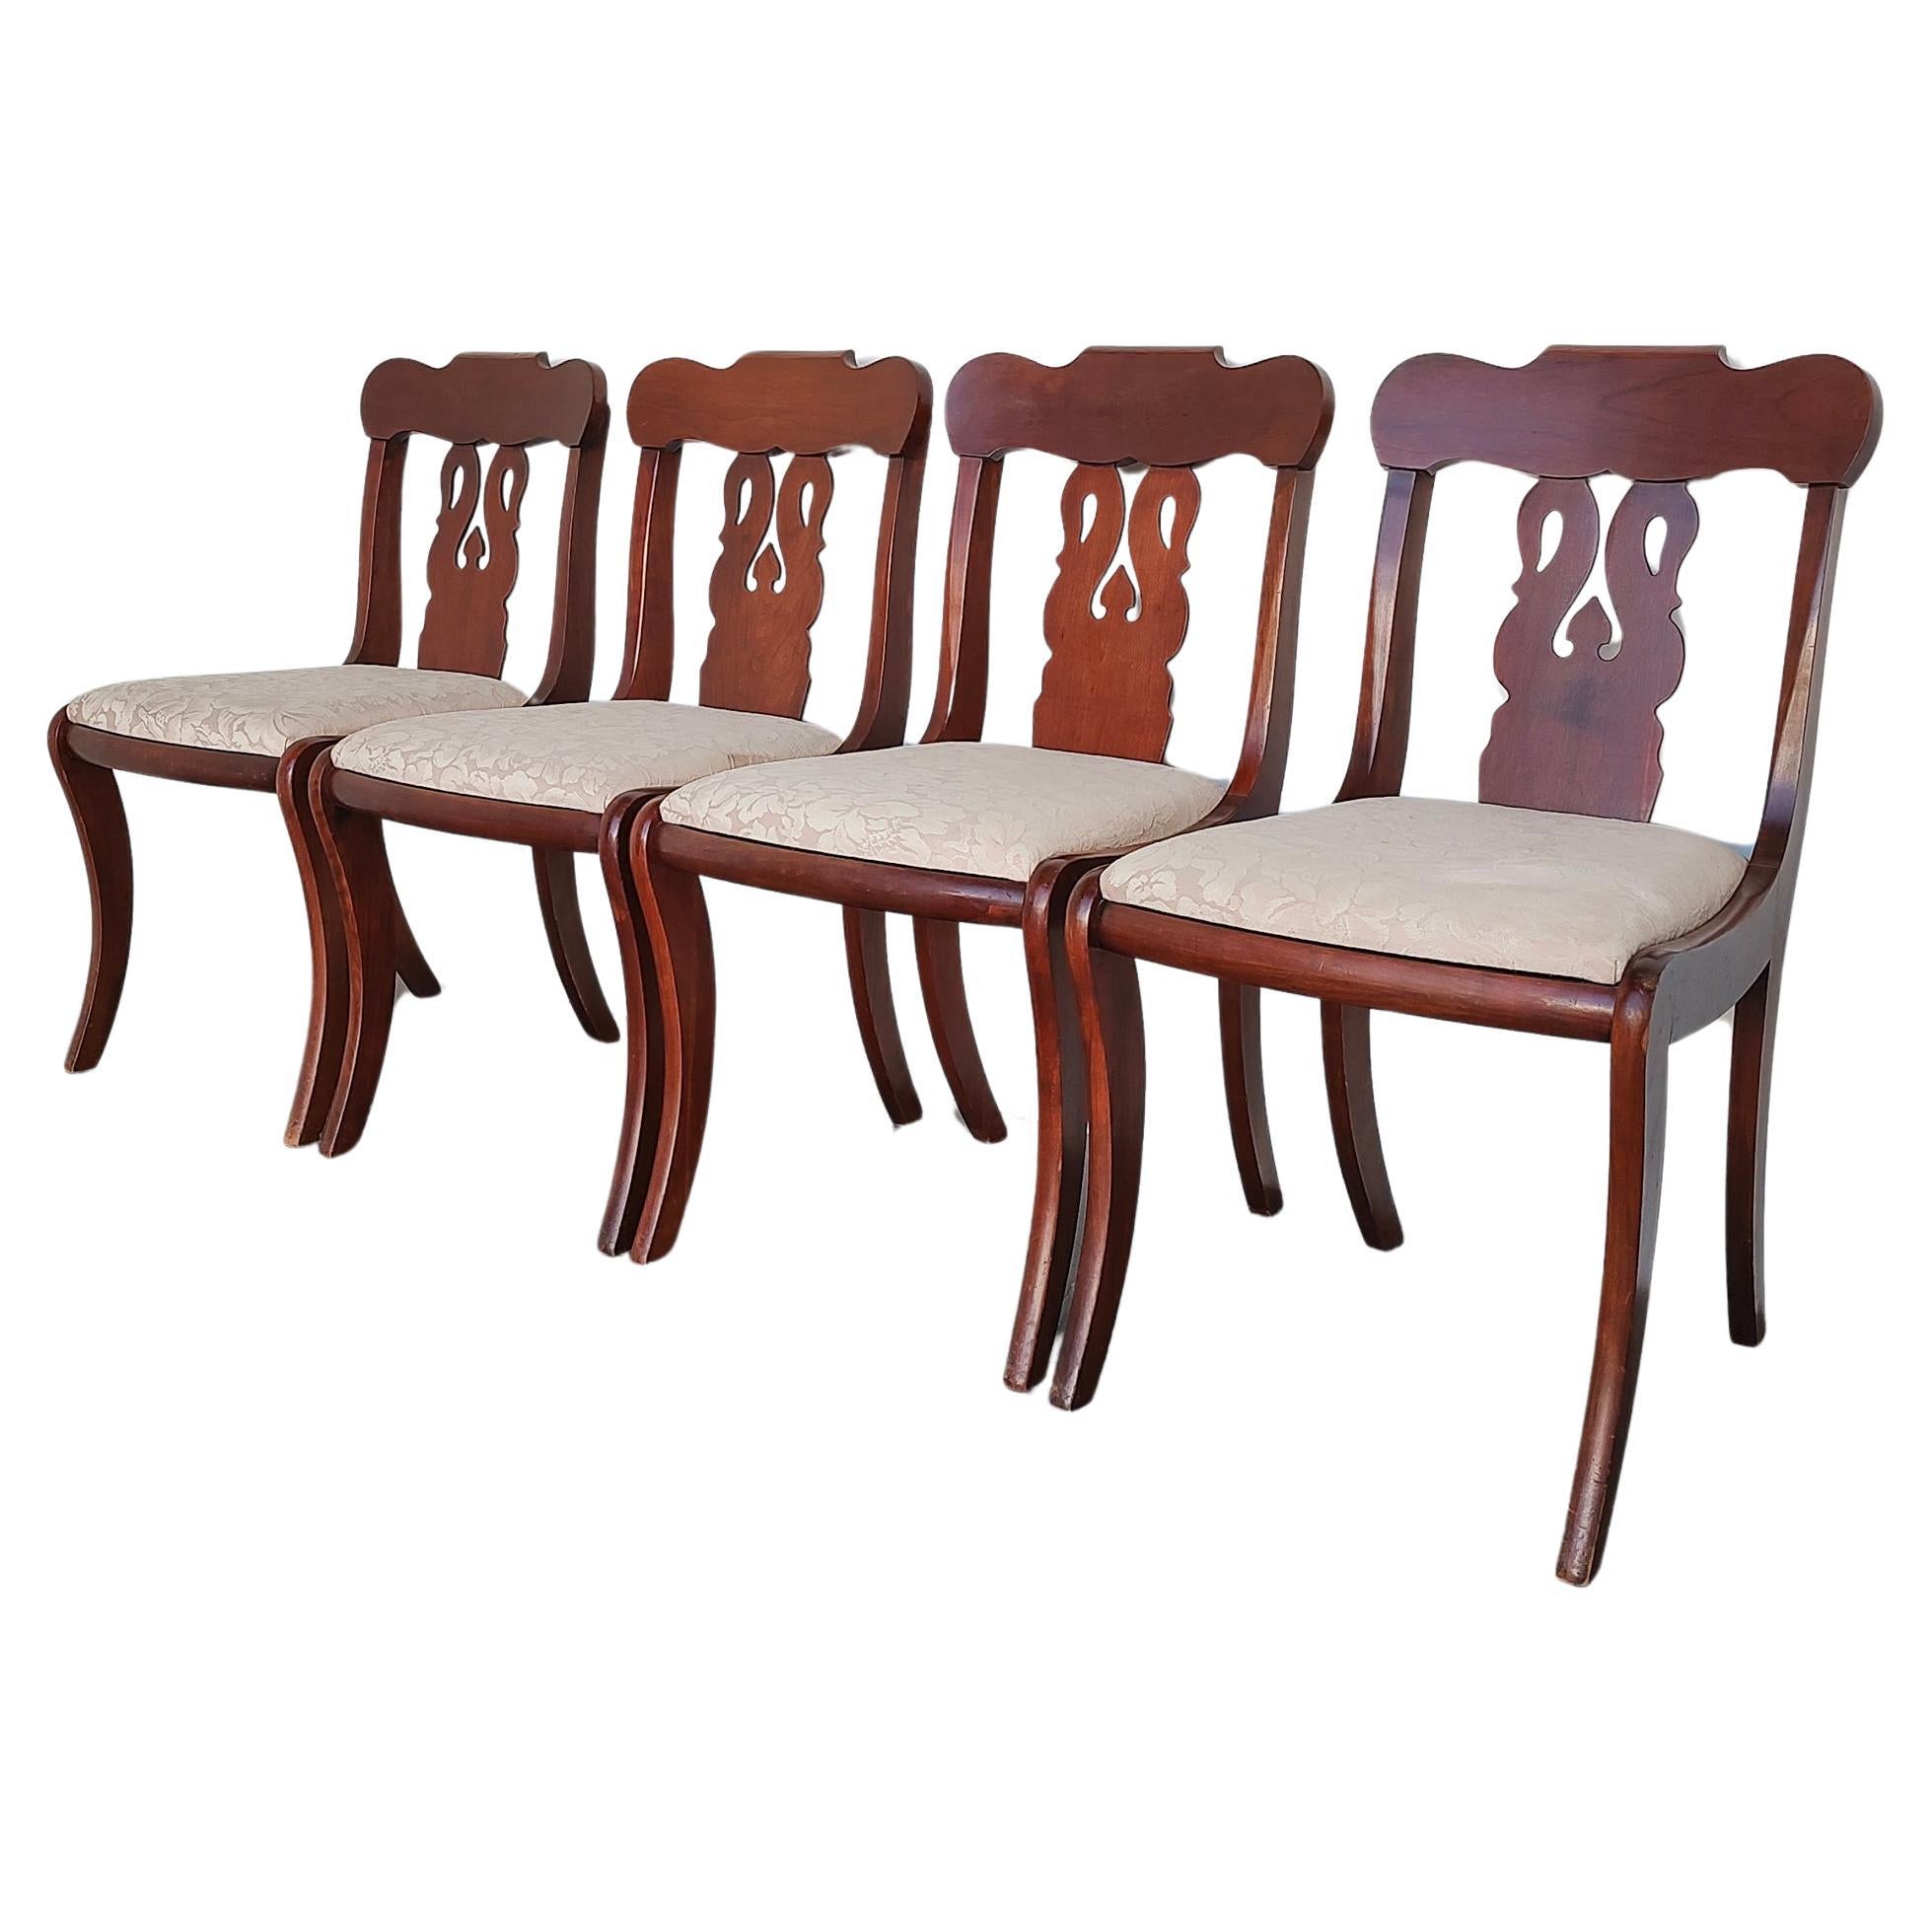 1950s Set of 4 Solid Cherry Wood Regency Style Dining Chairs For Sale